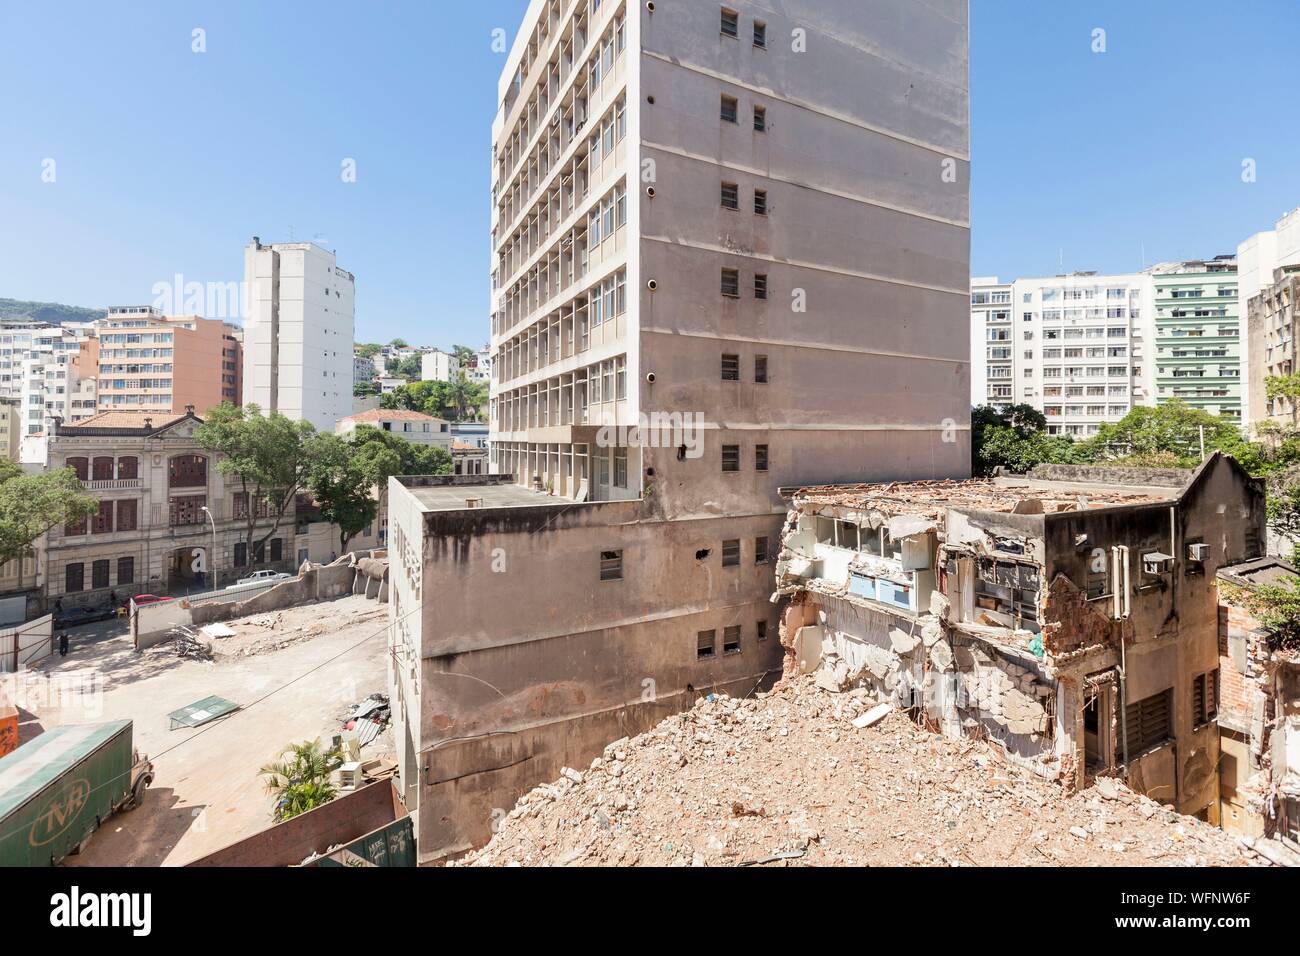 Brazil, State of Rio de Janeiro, Rio de Janeiro, city listed World Heritage by UNESCO, general view of the former site of the INCA, Instituto Nacional de Cancer, demolition site with an asbestos issue Stock Photo